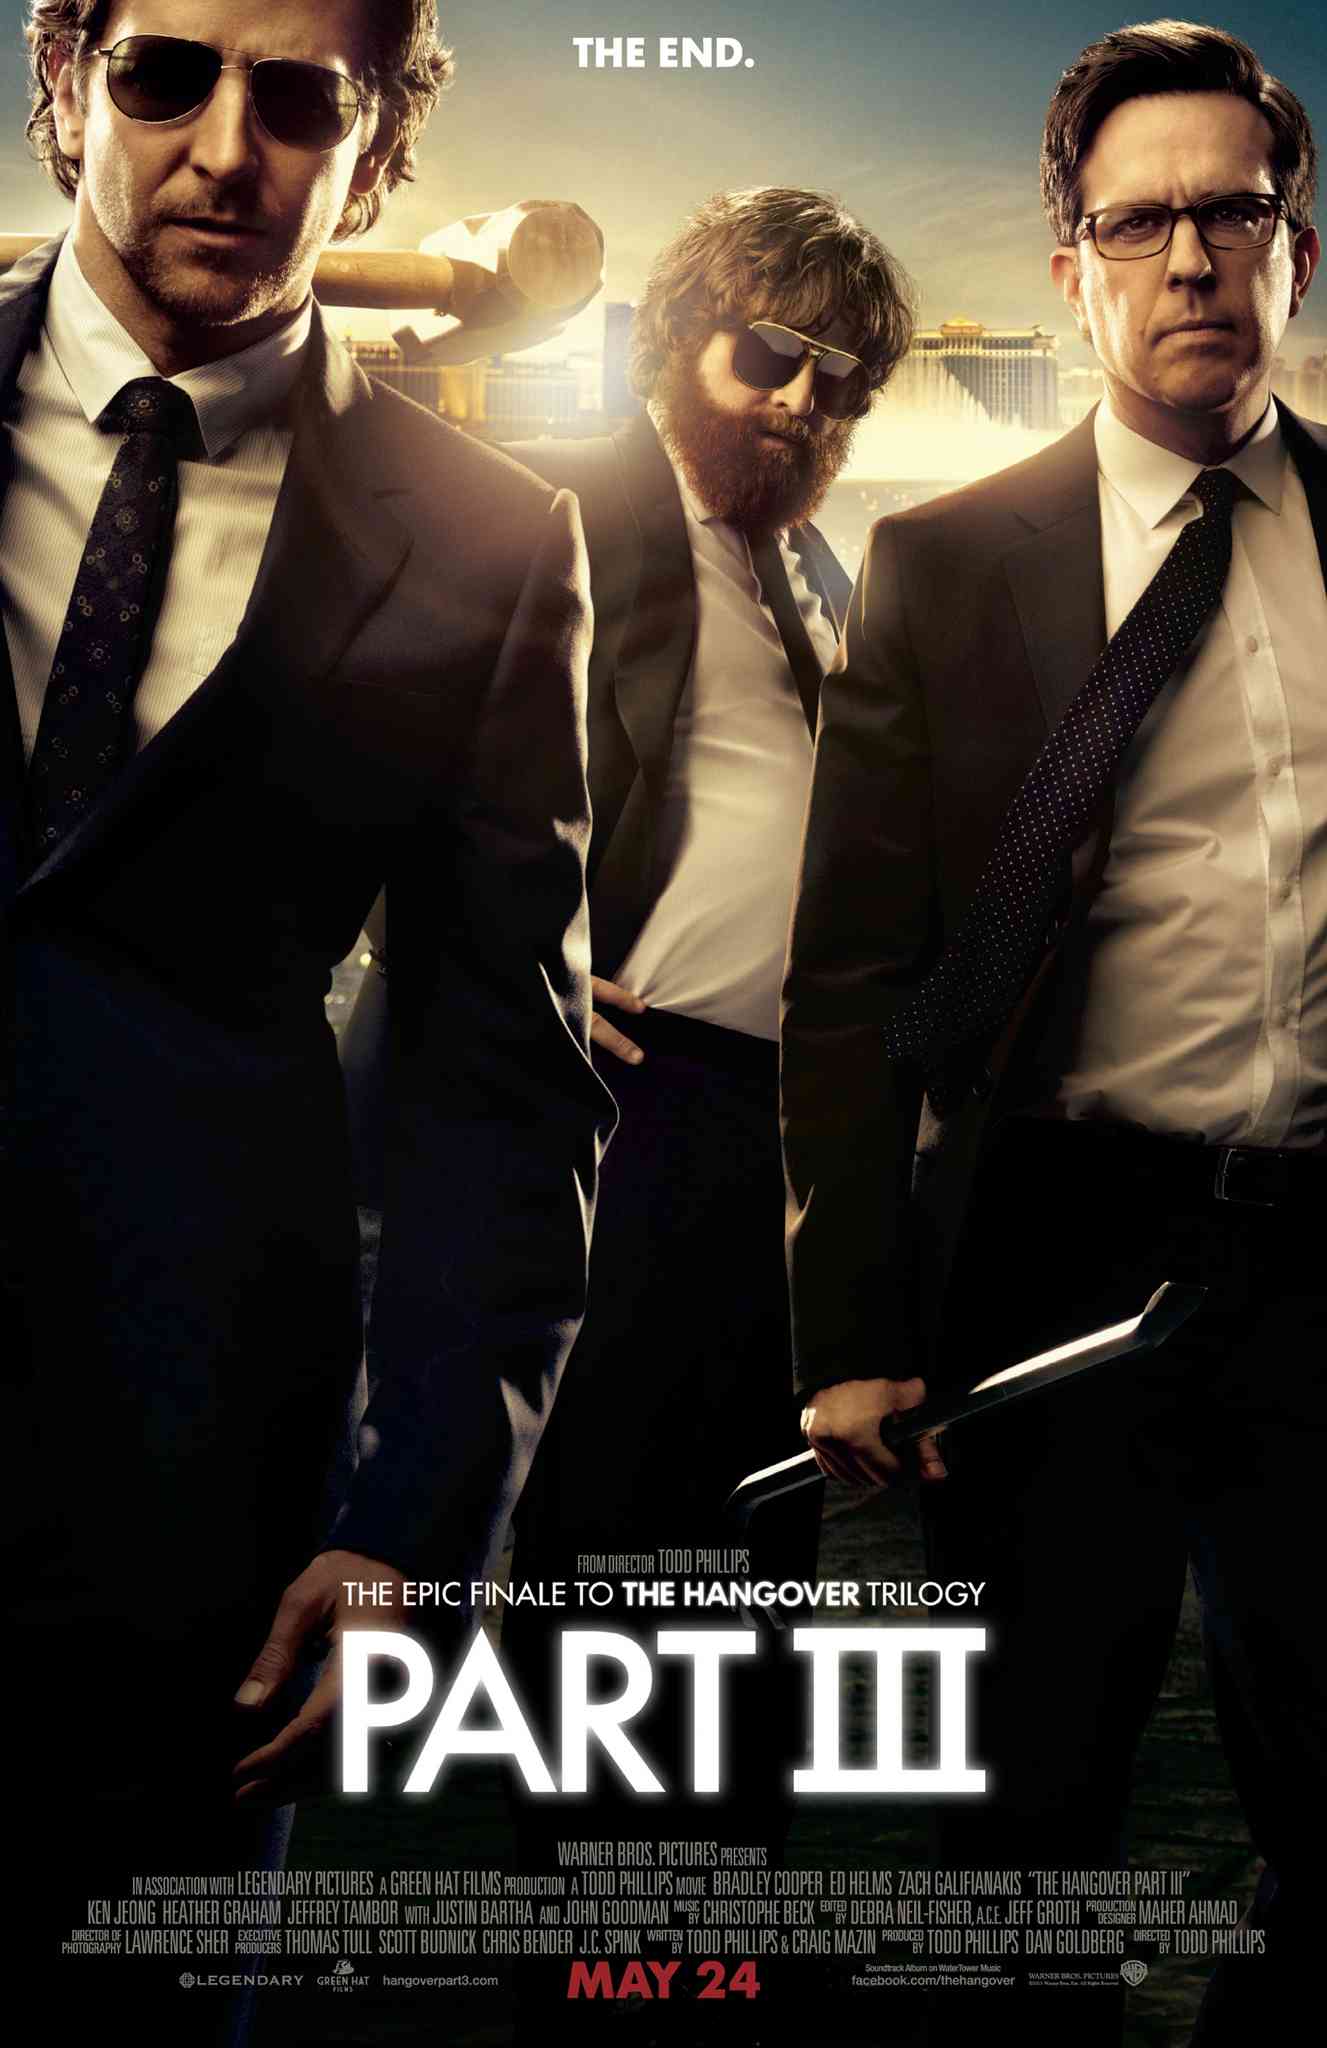 FULL MOVIE: The Hangover Part III (2013)